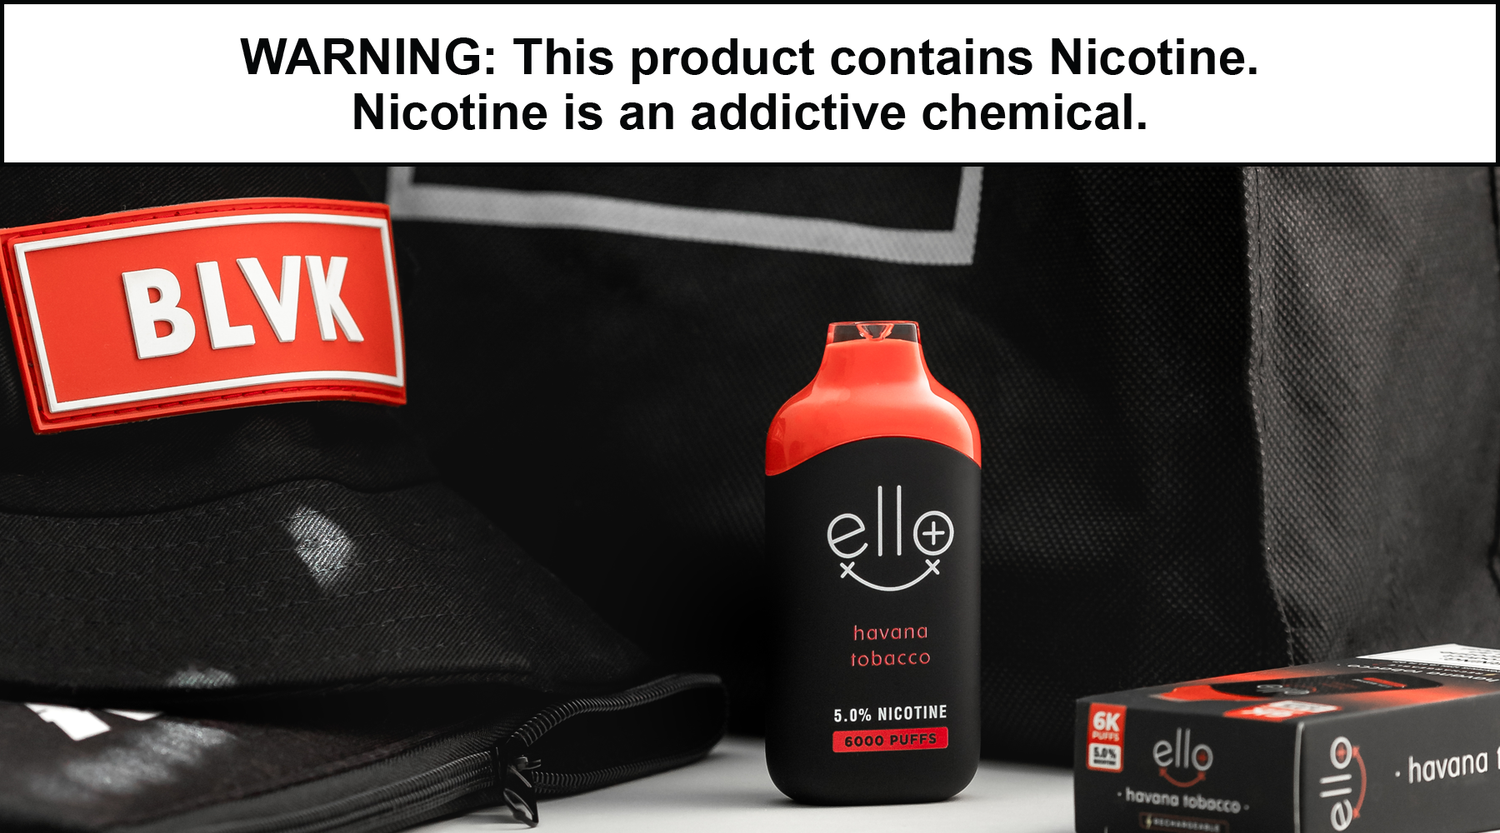 How Dangerous is Nicotine, Specifically?